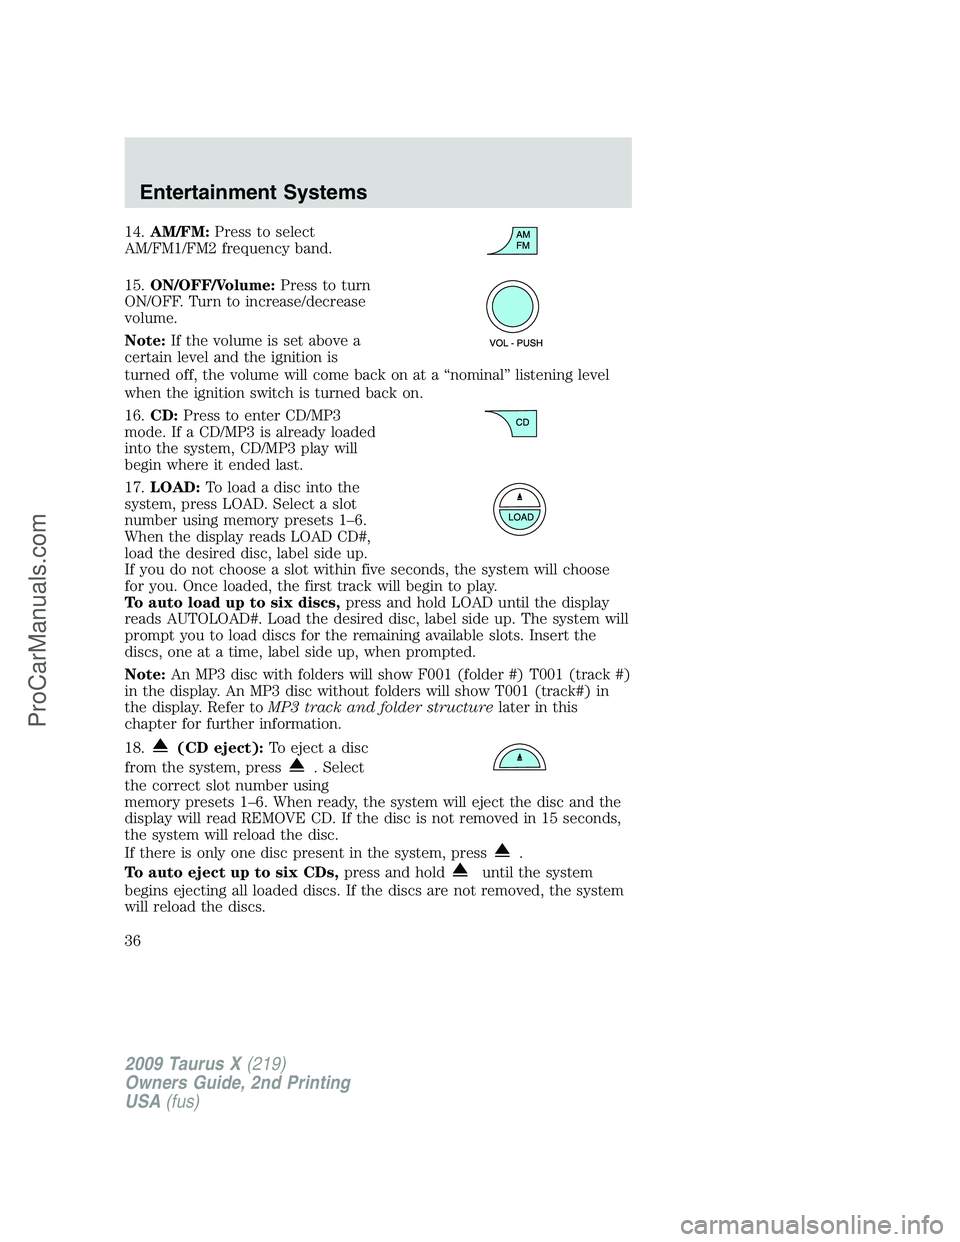 FORD FREESTYLE 2009 Owners Guide 14.AM/FM:Press to select
AM/FM1/FM2 frequency band.
15.ON/OFF/Volume:Press to turn
ON/OFF. Turn to increase/decrease
volume.
Note:If the volume is set above a
certain level and the ignition is
turned 